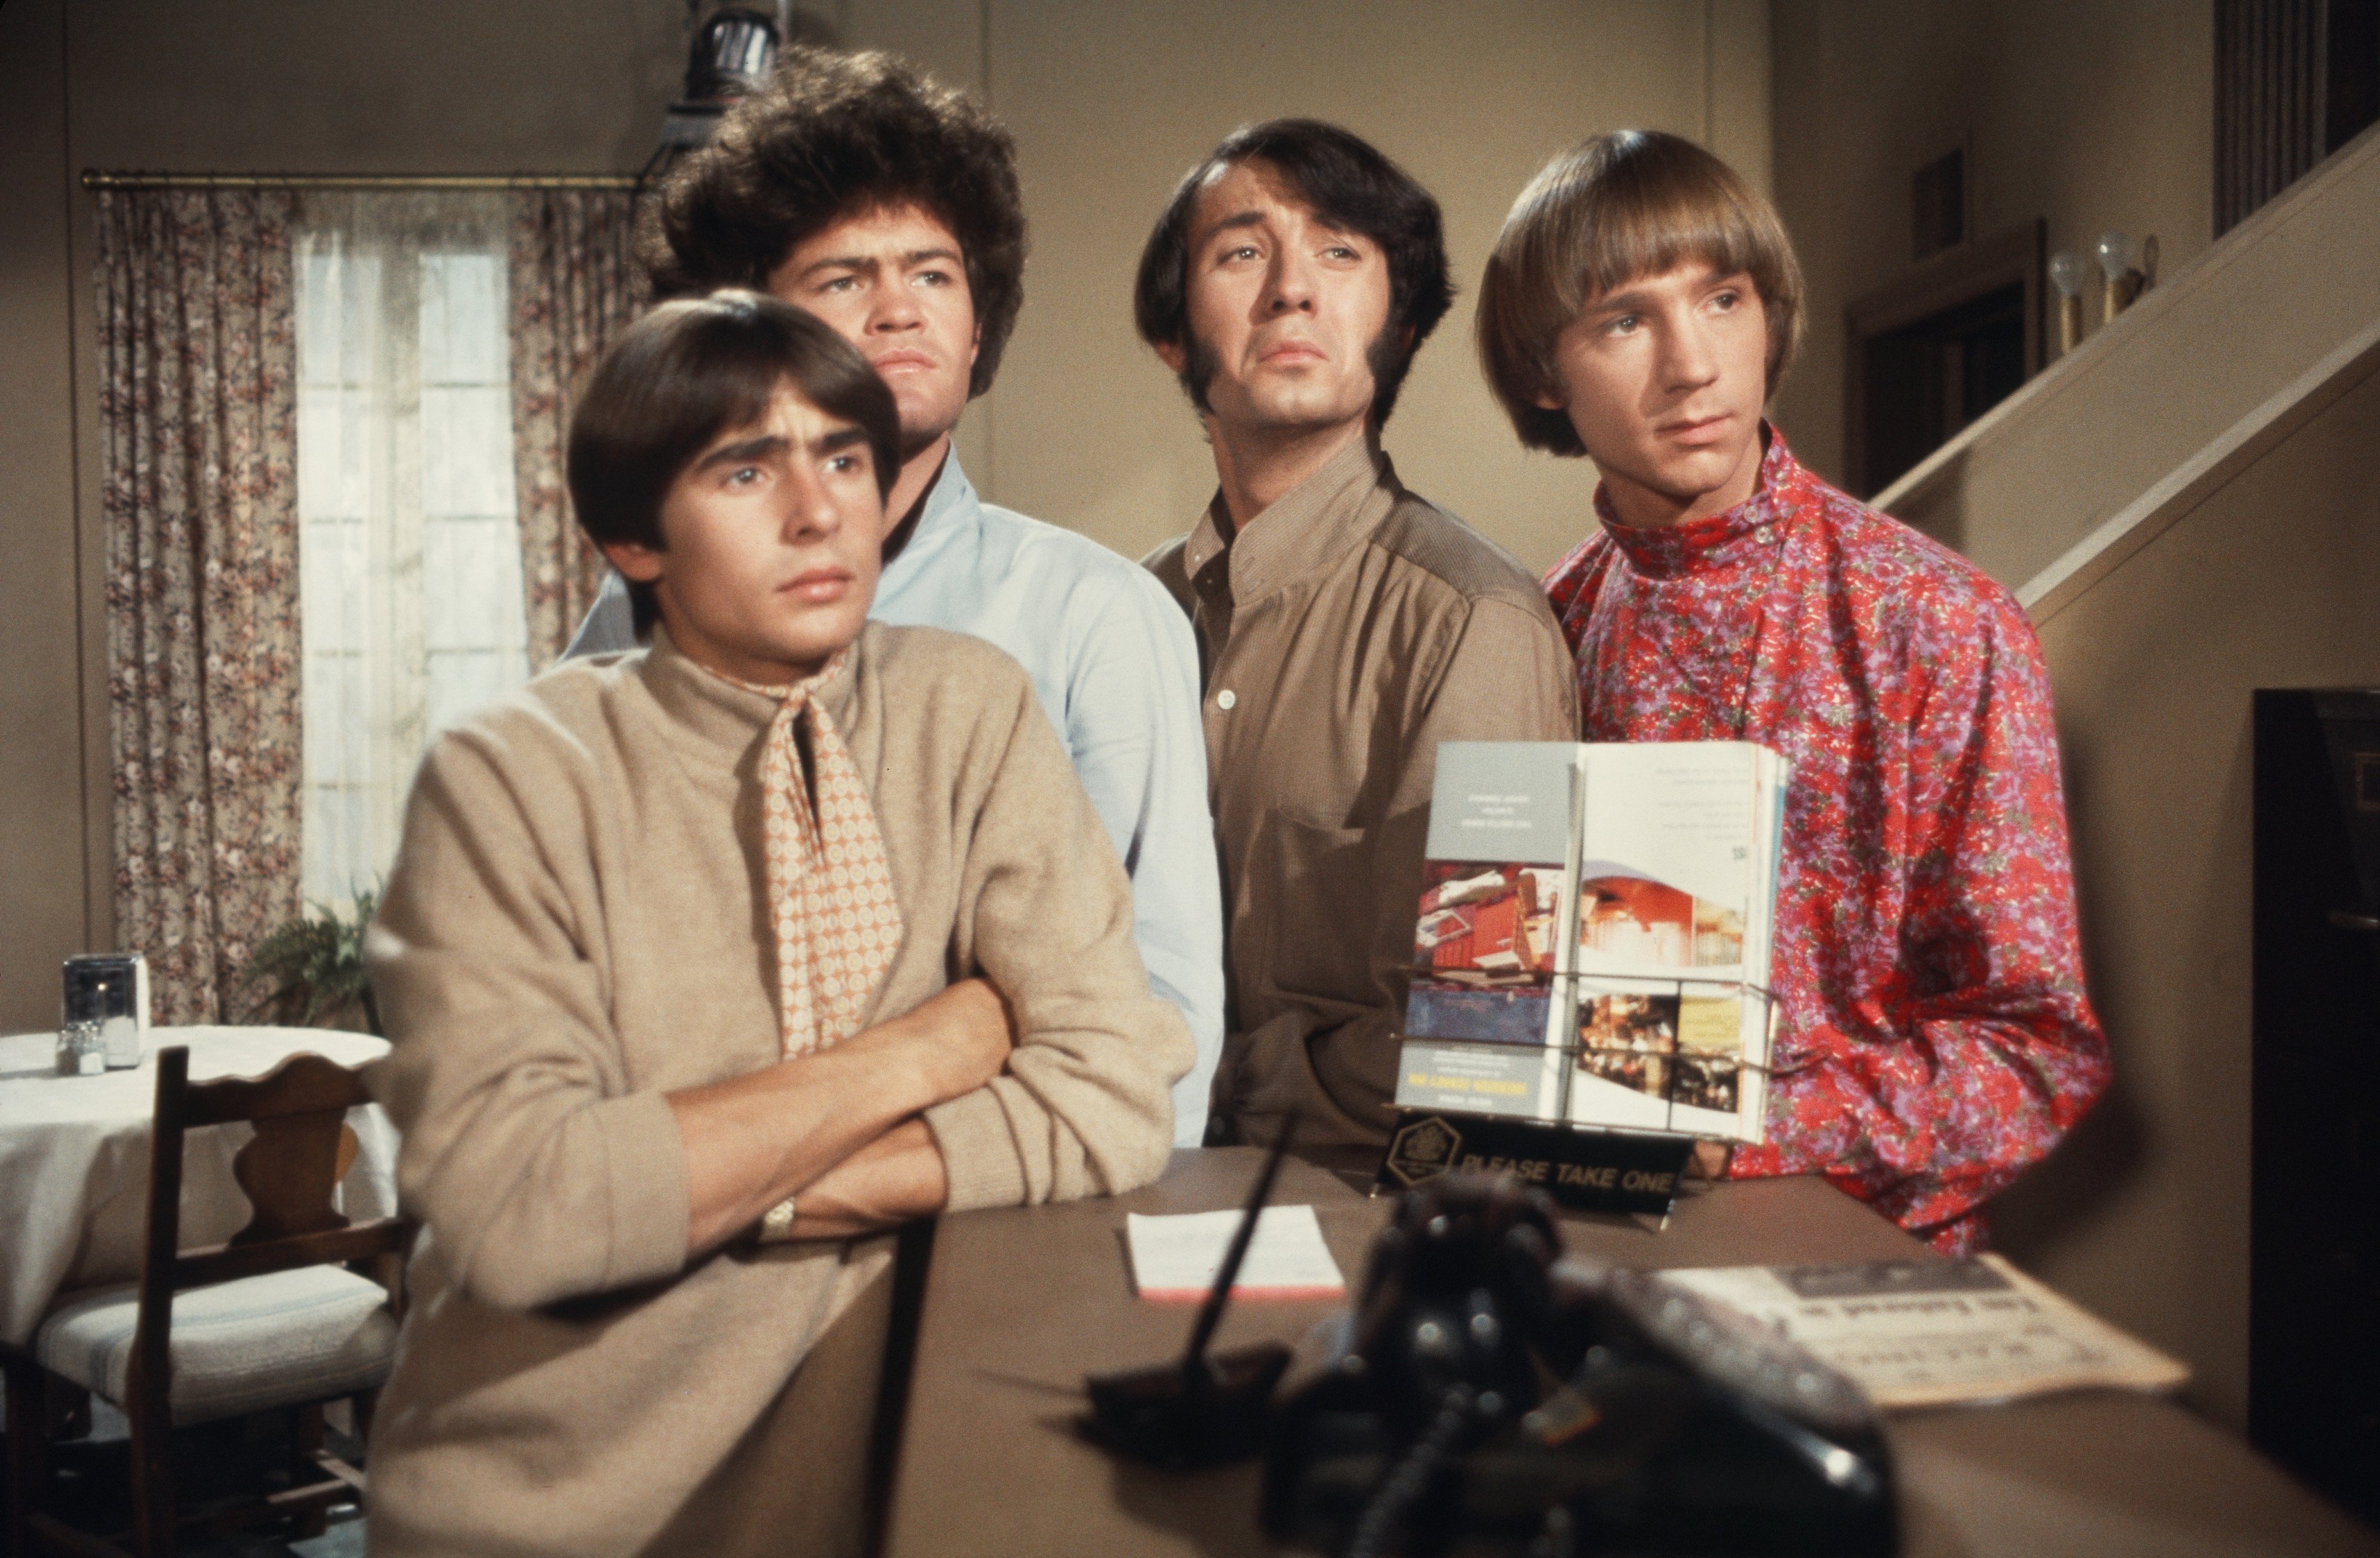 The Monkees' Davy Jones, Micky Dolenz, Mike Nesmith, and Peter Tork around a piano